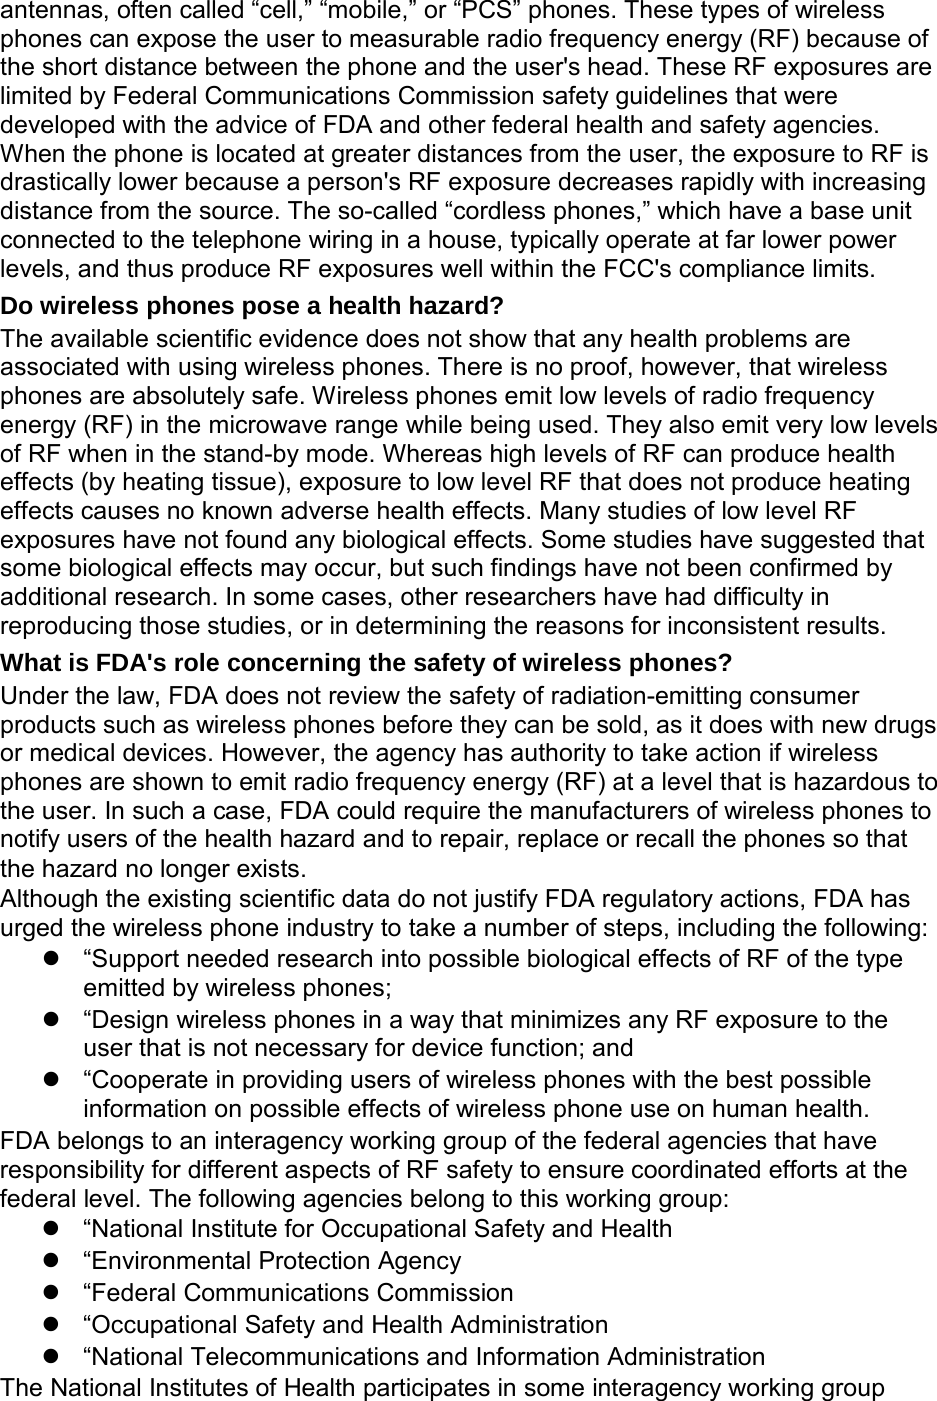 antennas, often called “cell,” “mobile,” or “PCS” phones. These types of wireless phones can expose the user to measurable radio frequency energy (RF) because of the short distance between the phone and the user&apos;s head. These RF exposures are limited by Federal Communications Commission safety guidelines that were developed with the advice of FDA and other federal health and safety agencies. When the phone is located at greater distances from the user, the exposure to RF is drastically lower because a person&apos;s RF exposure decreases rapidly with increasing distance from the source. The so-called “cordless phones,” which have a base unit connected to the telephone wiring in a house, typically operate at far lower power levels, and thus produce RF exposures well within the FCC&apos;s compliance limits. Do wireless phones pose a health hazard? The available scientific evidence does not show that any health problems are associated with using wireless phones. There is no proof, however, that wireless phones are absolutely safe. Wireless phones emit low levels of radio frequency energy (RF) in the microwave range while being used. They also emit very low levels of RF when in the stand-by mode. Whereas high levels of RF can produce health effects (by heating tissue), exposure to low level RF that does not produce heating effects causes no known adverse health effects. Many studies of low level RF exposures have not found any biological effects. Some studies have suggested that some biological effects may occur, but such findings have not been confirmed by additional research. In some cases, other researchers have had difficulty in reproducing those studies, or in determining the reasons for inconsistent results. What is FDA&apos;s role concerning the safety of wireless phones? Under the law, FDA does not review the safety of radiation-emitting consumer products such as wireless phones before they can be sold, as it does with new drugs or medical devices. However, the agency has authority to take action if wireless phones are shown to emit radio frequency energy (RF) at a level that is hazardous to the user. In such a case, FDA could require the manufacturers of wireless phones to notify users of the health hazard and to repair, replace or recall the phones so that the hazard no longer exists. Although the existing scientific data do not justify FDA regulatory actions, FDA has urged the wireless phone industry to take a number of steps, including the following:  “Support needed research into possible biological effects of RF of the type emitted by wireless phones;  “Design wireless phones in a way that minimizes any RF exposure to the user that is not necessary for device function; and  “Cooperate in providing users of wireless phones with the best possible information on possible effects of wireless phone use on human health. FDA belongs to an interagency working group of the federal agencies that have responsibility for different aspects of RF safety to ensure coordinated efforts at the federal level. The following agencies belong to this working group:  “National Institute for Occupational Safety and Health  “Environmental Protection Agency  “Federal Communications Commission  “Occupational Safety and Health Administration  “National Telecommunications and Information Administration The National Institutes of Health participates in some interagency working group 